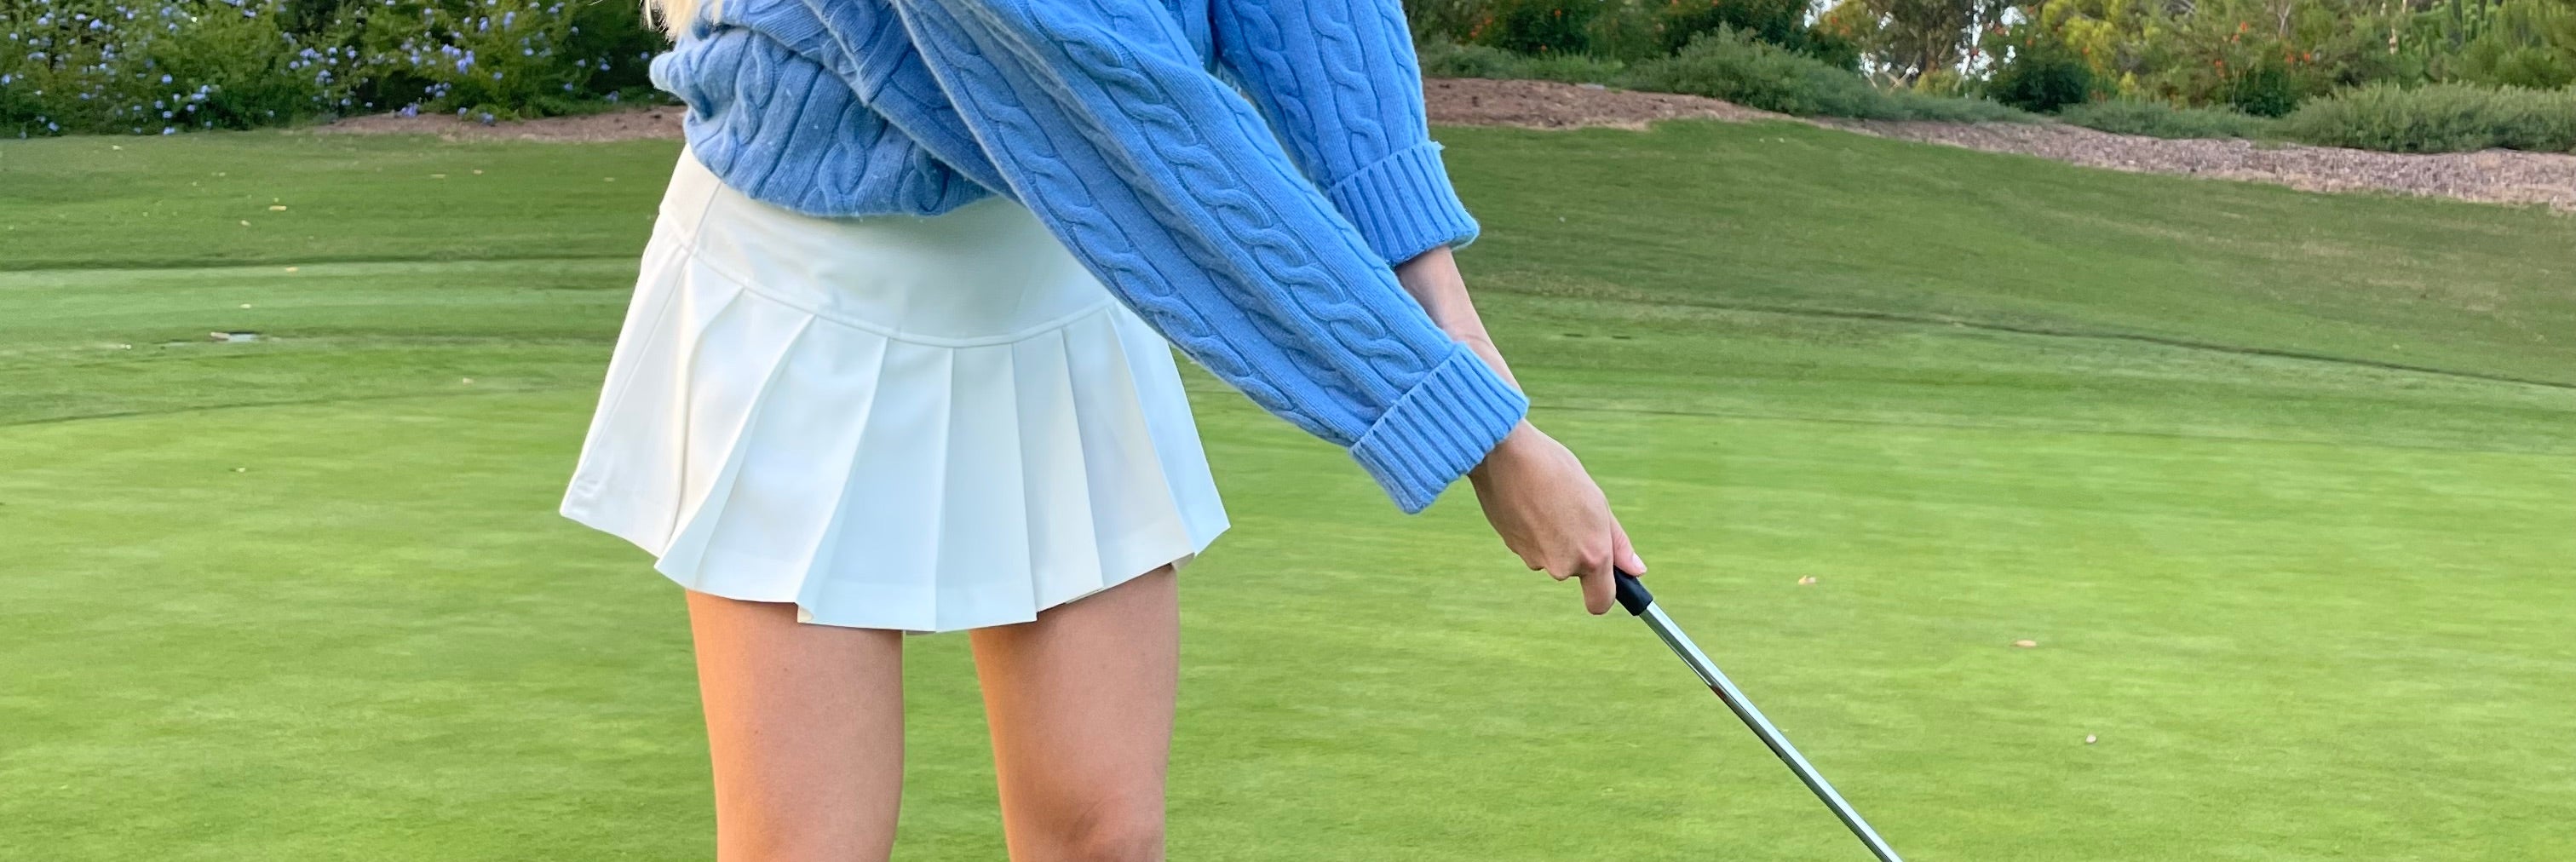 A stylish Swing: Comparing Golf Skirts from Camille Hind Golf and LuLu